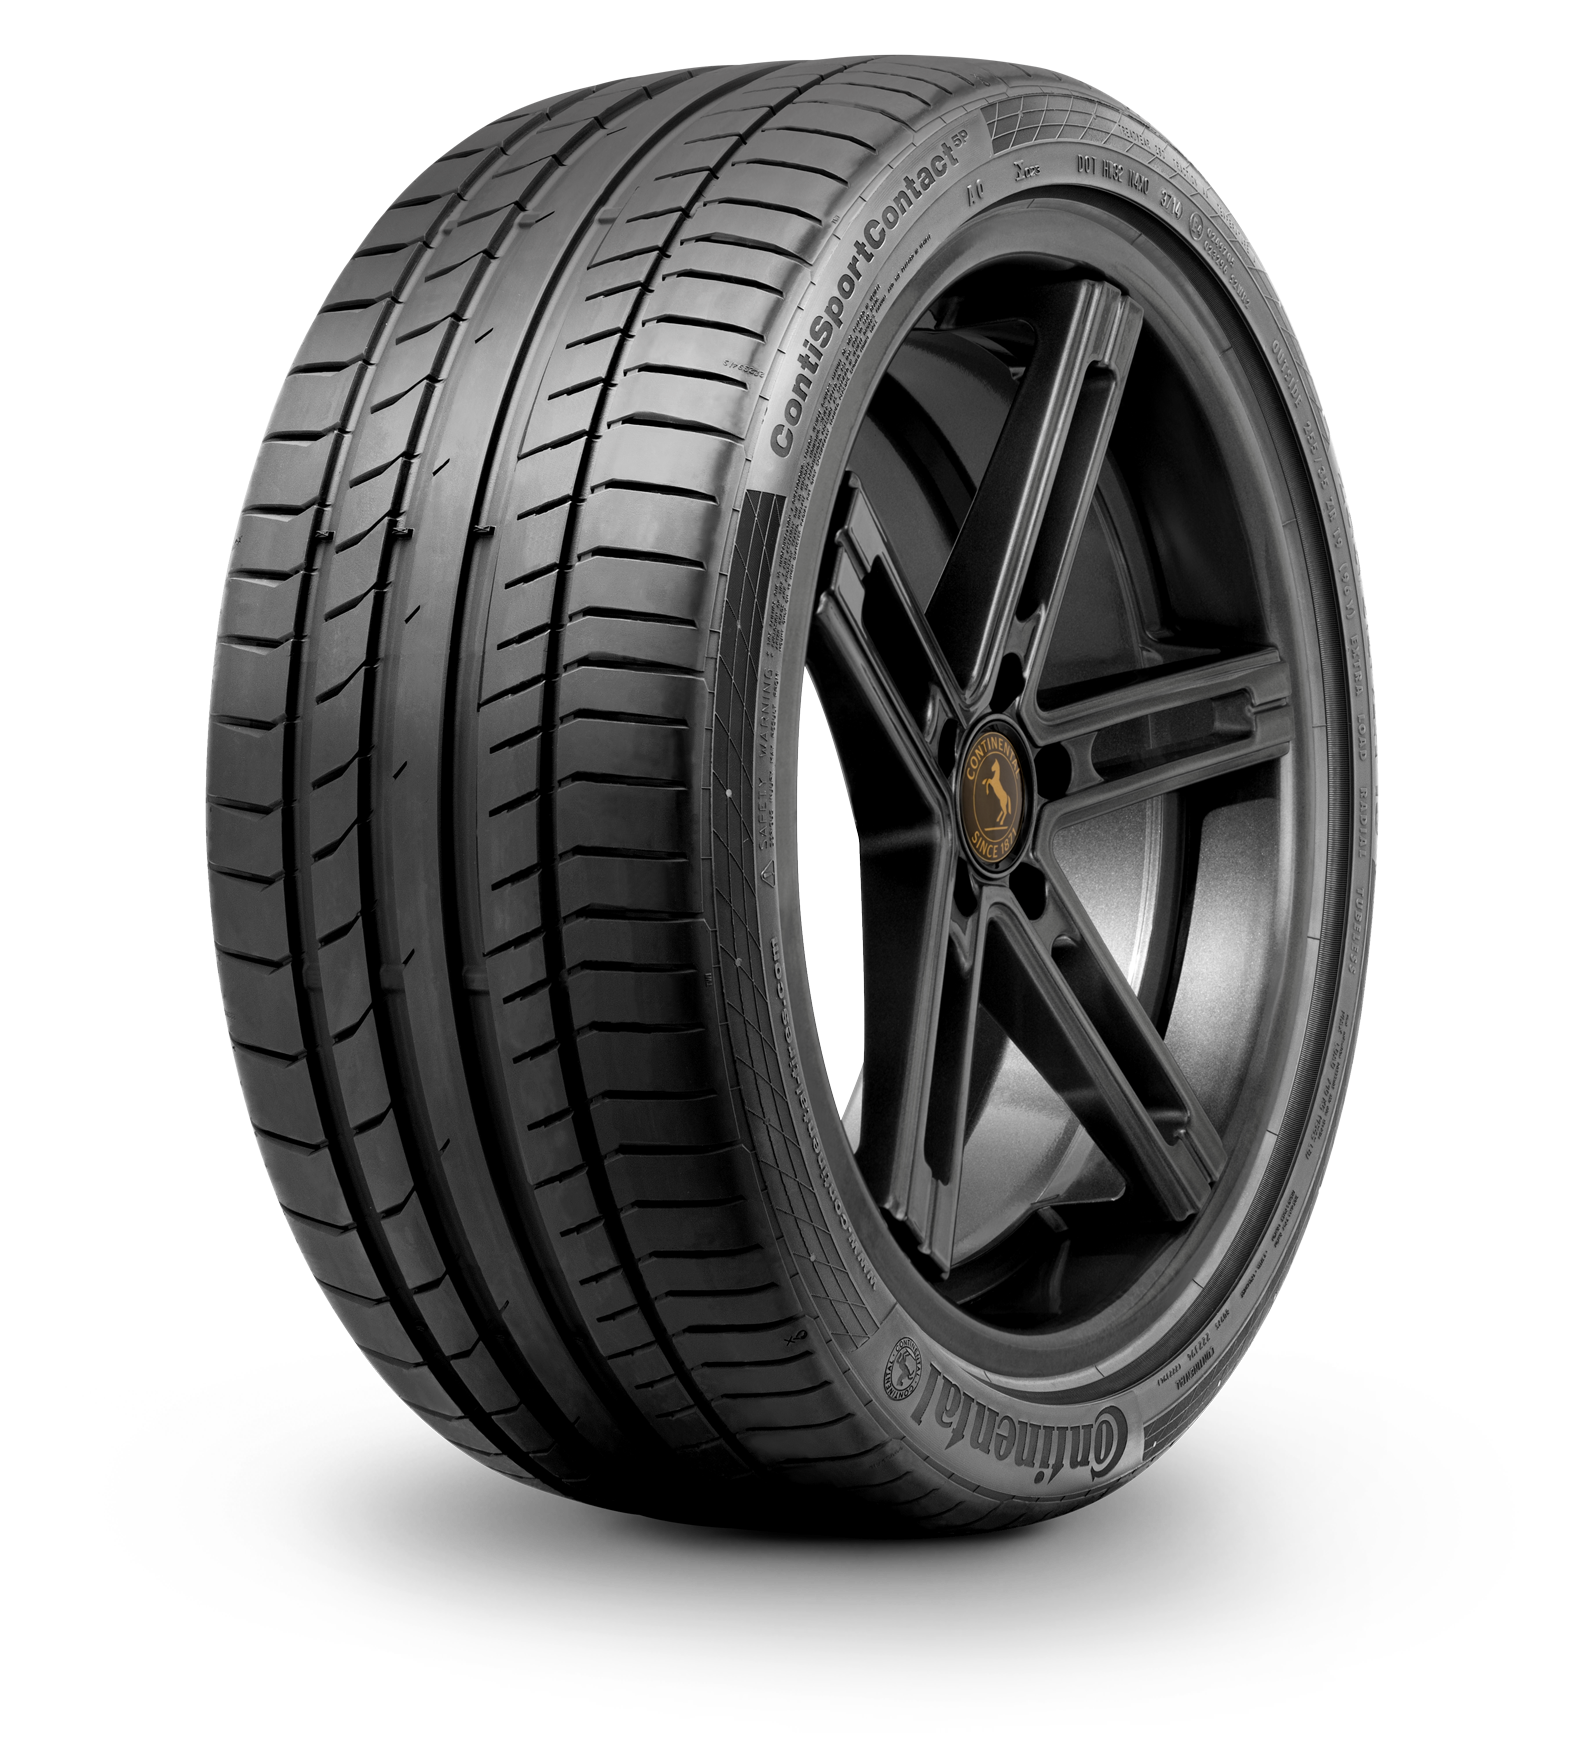 Continental ContiSportContact 5P all_ Season Radial Tire-255/40ZR21 102Y XL-ply 